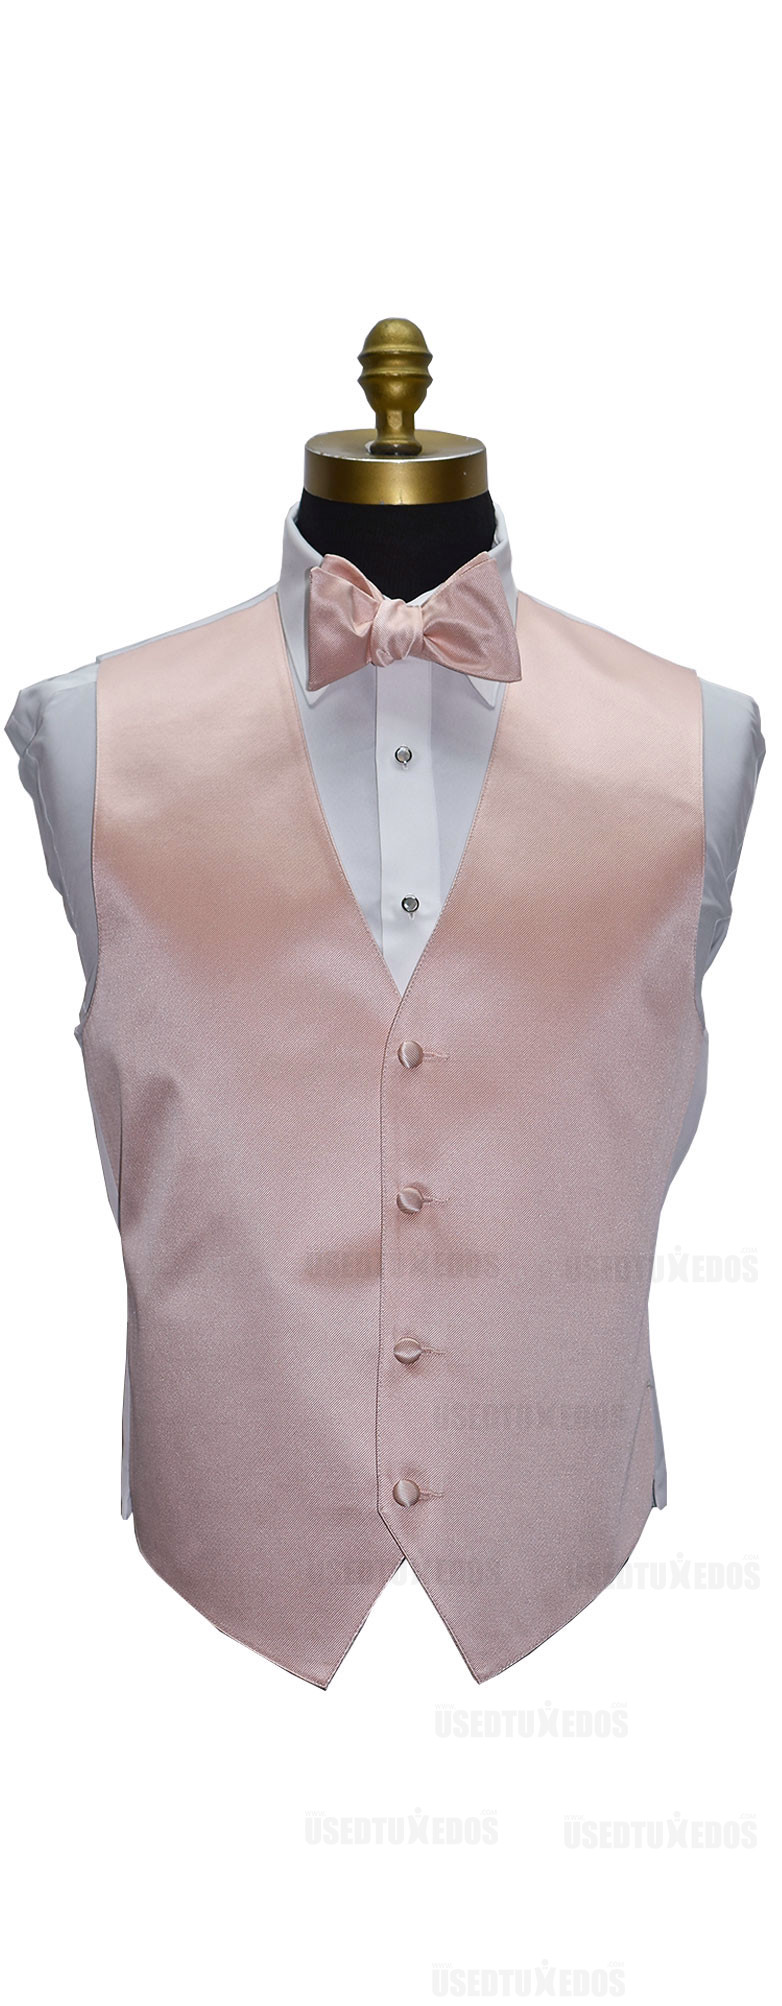 men's and boy's blush tuxedo vest with blush tie-yourself bowtie by San Miguel Formals